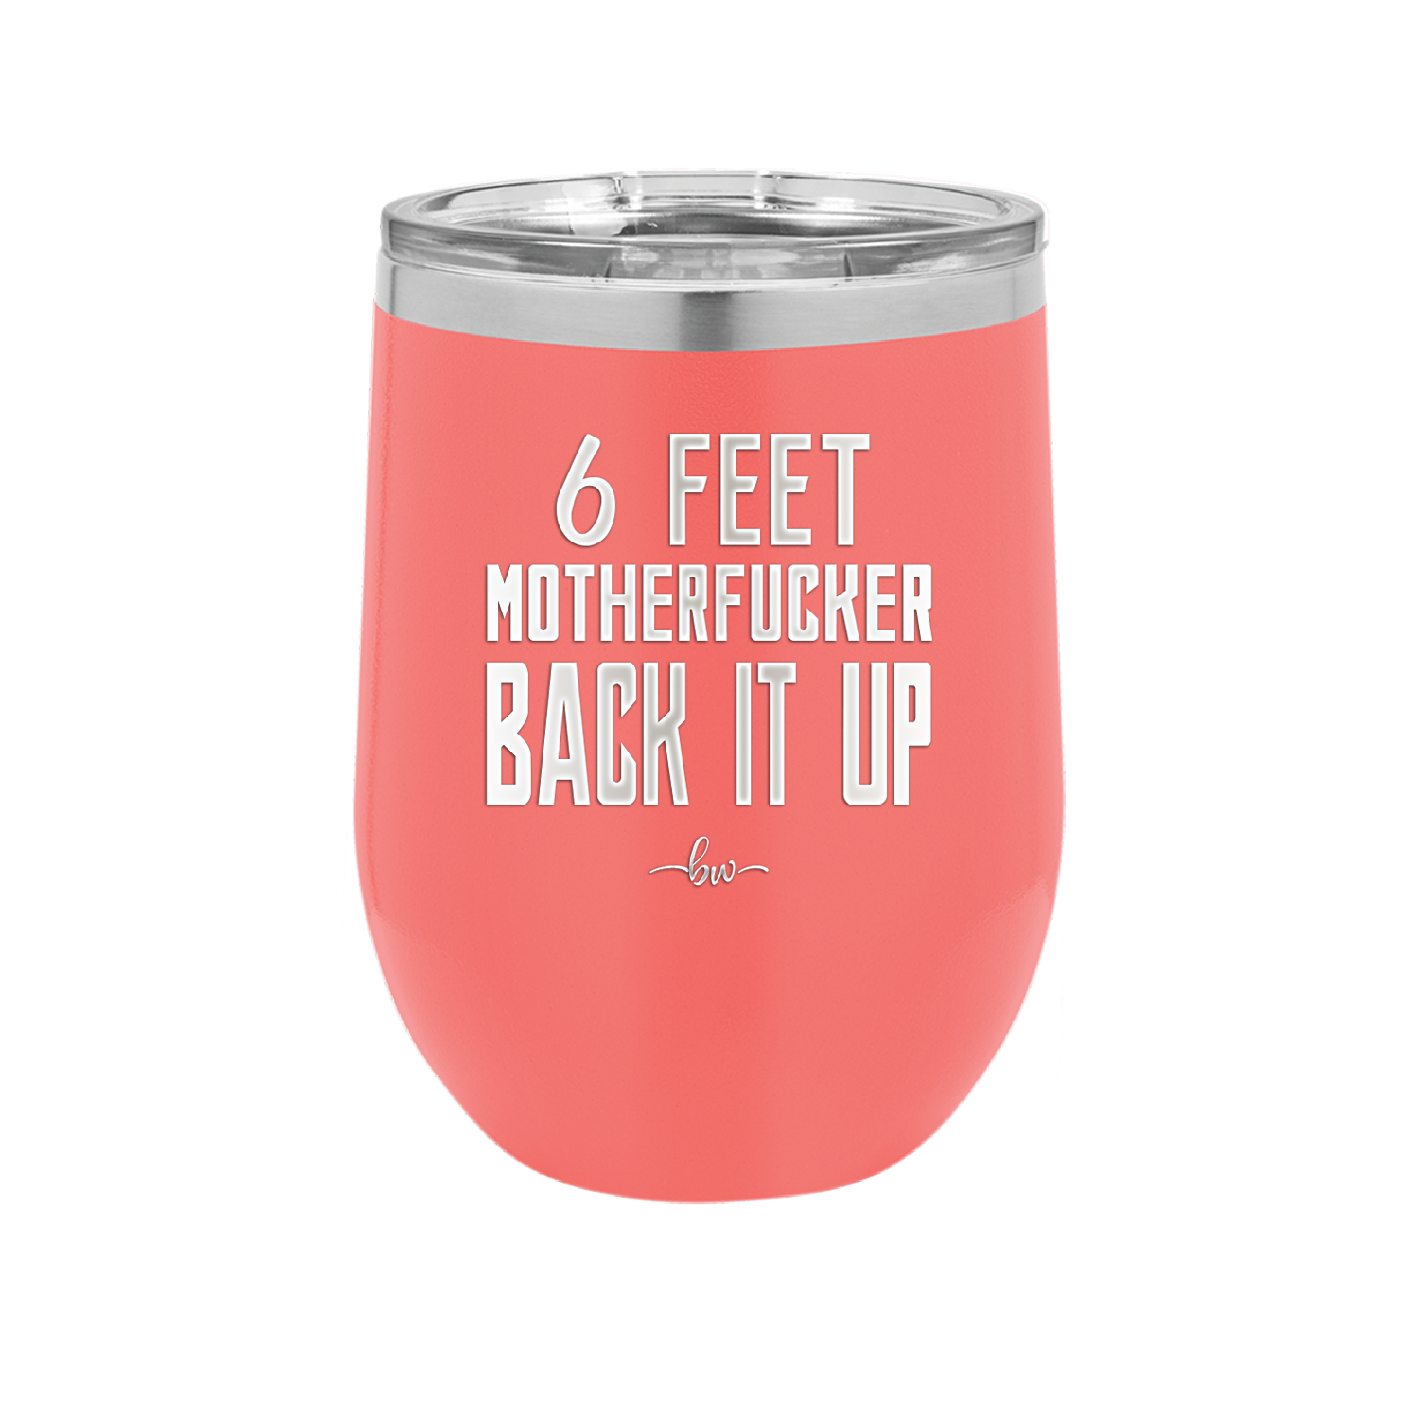 12 oz wine cup 6 feet motherfucker back it up - coral